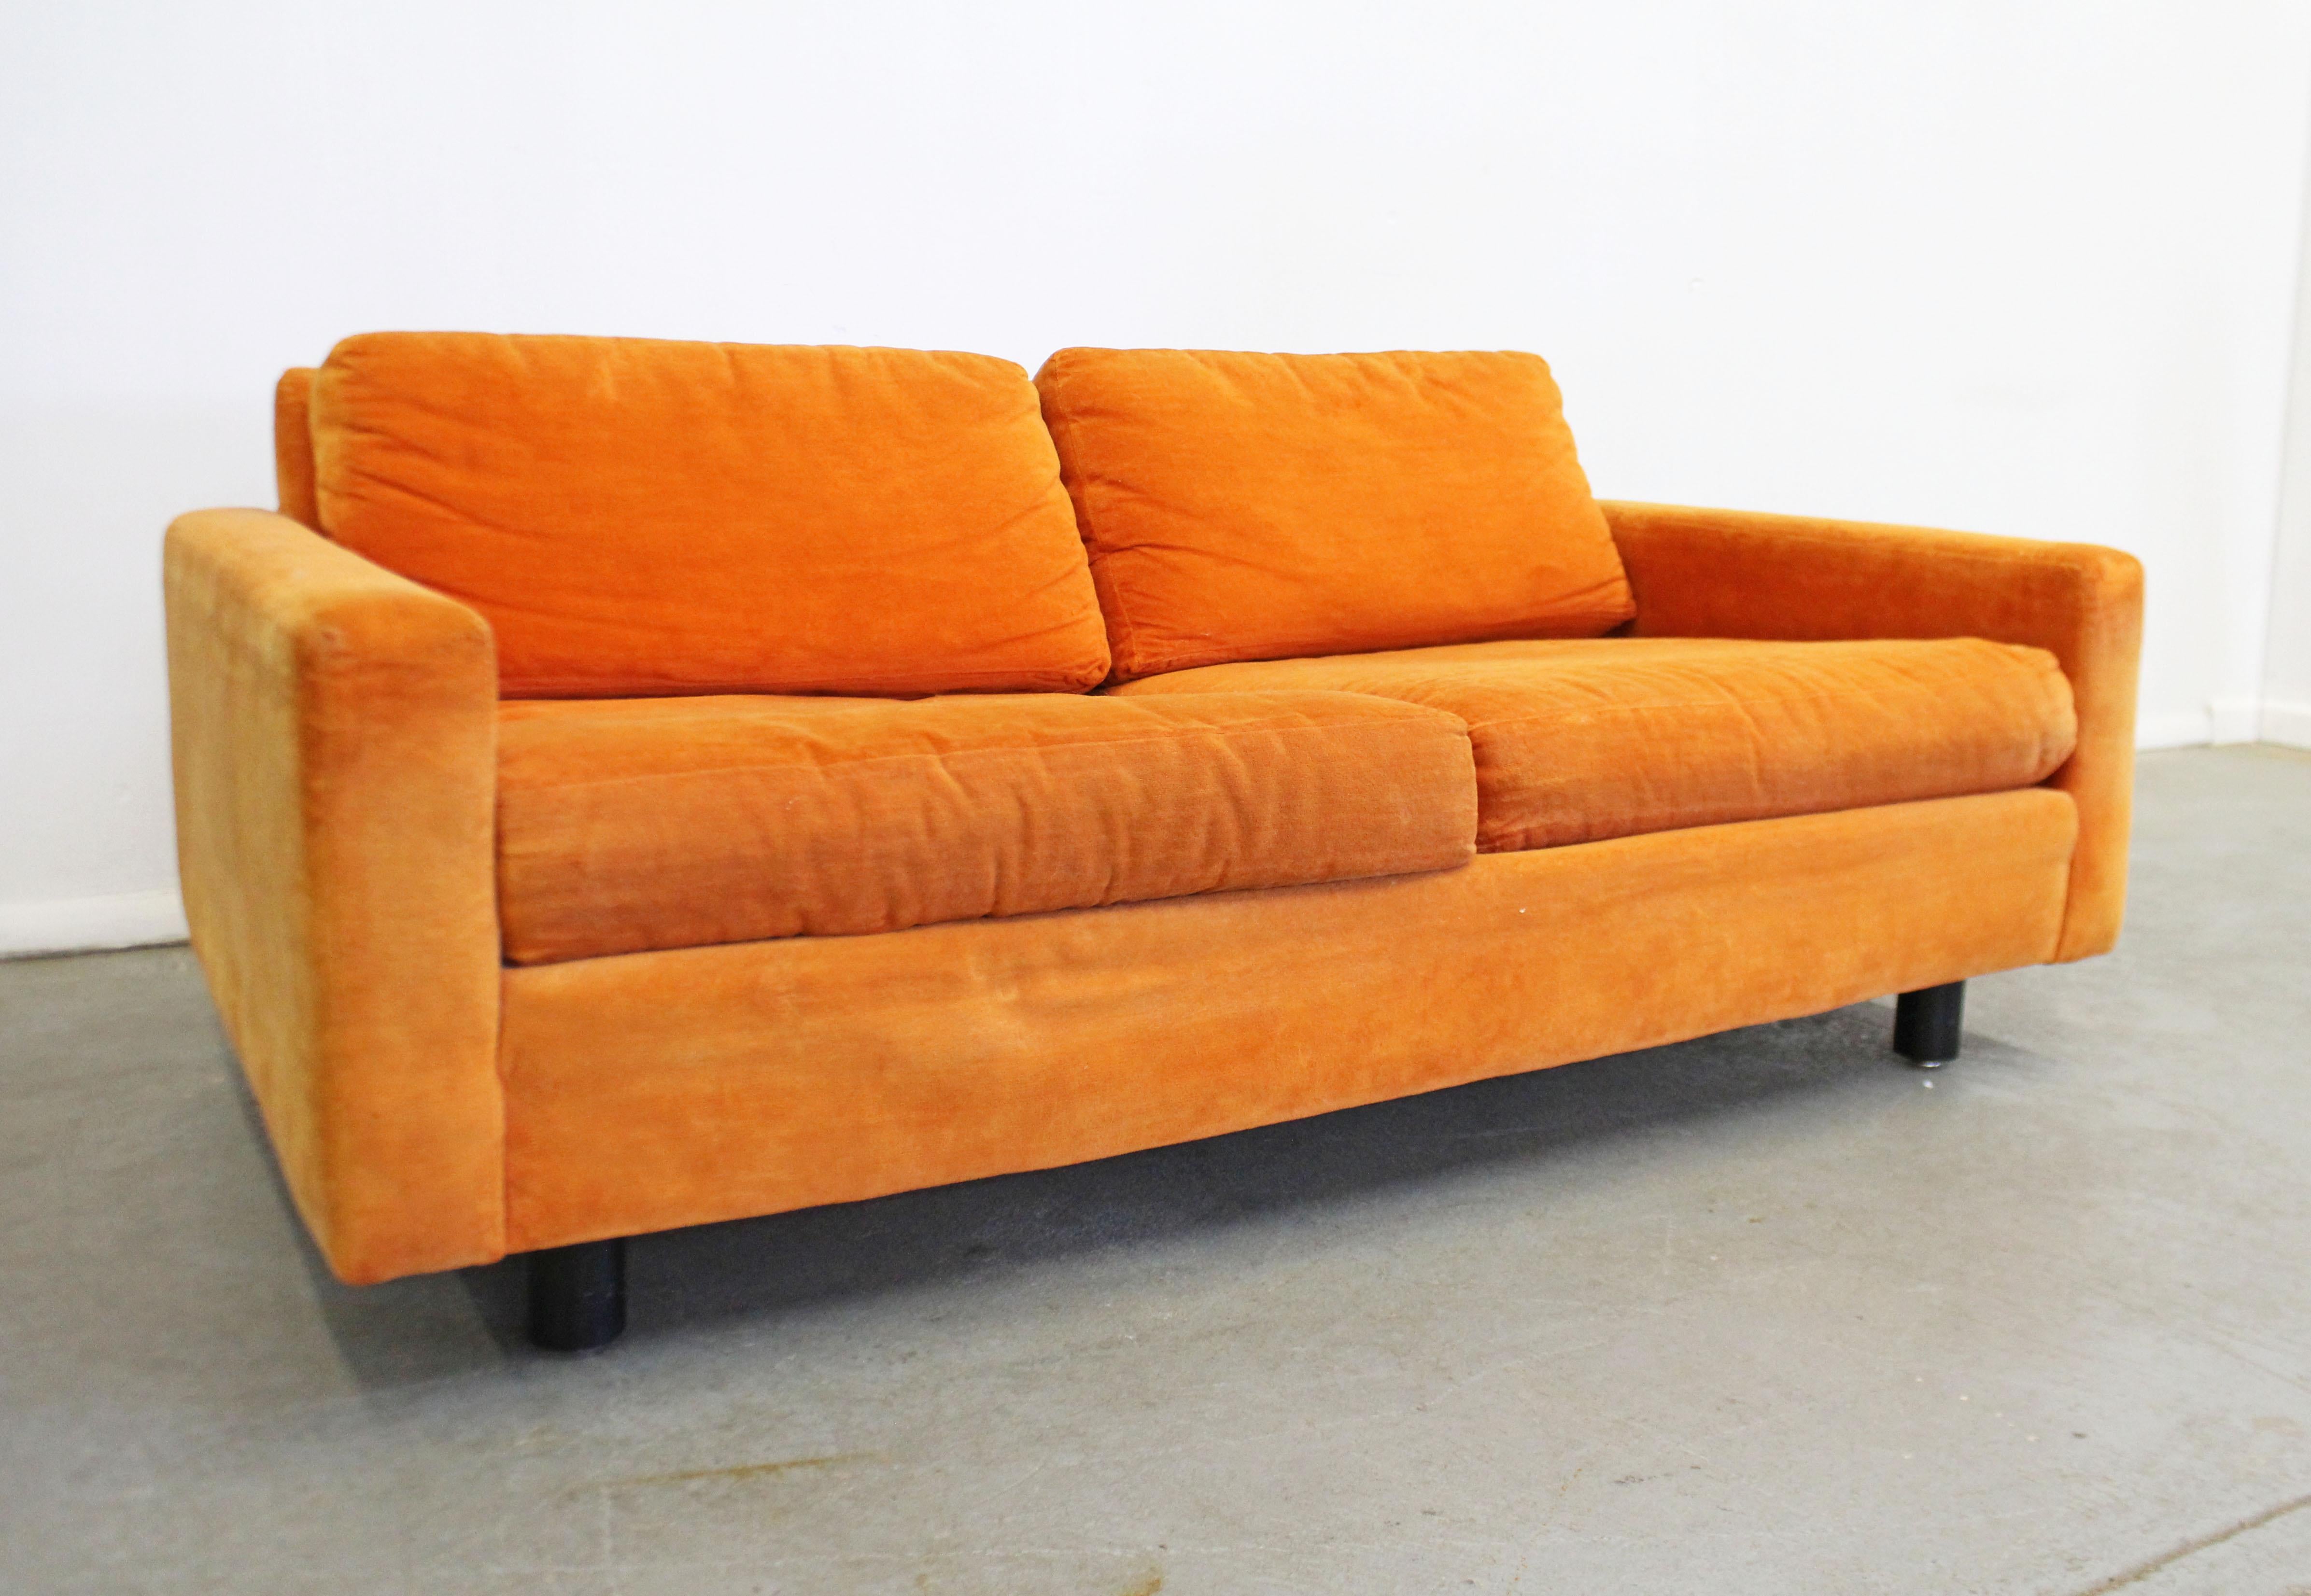 What a find. Offered is a super cool vintage loveseat by Founders 1st Edition. Features original upholstery and wooden legs. It is in overall great condition for its age with some slight age wear on upholstery. It is signed. The sofa has the look of